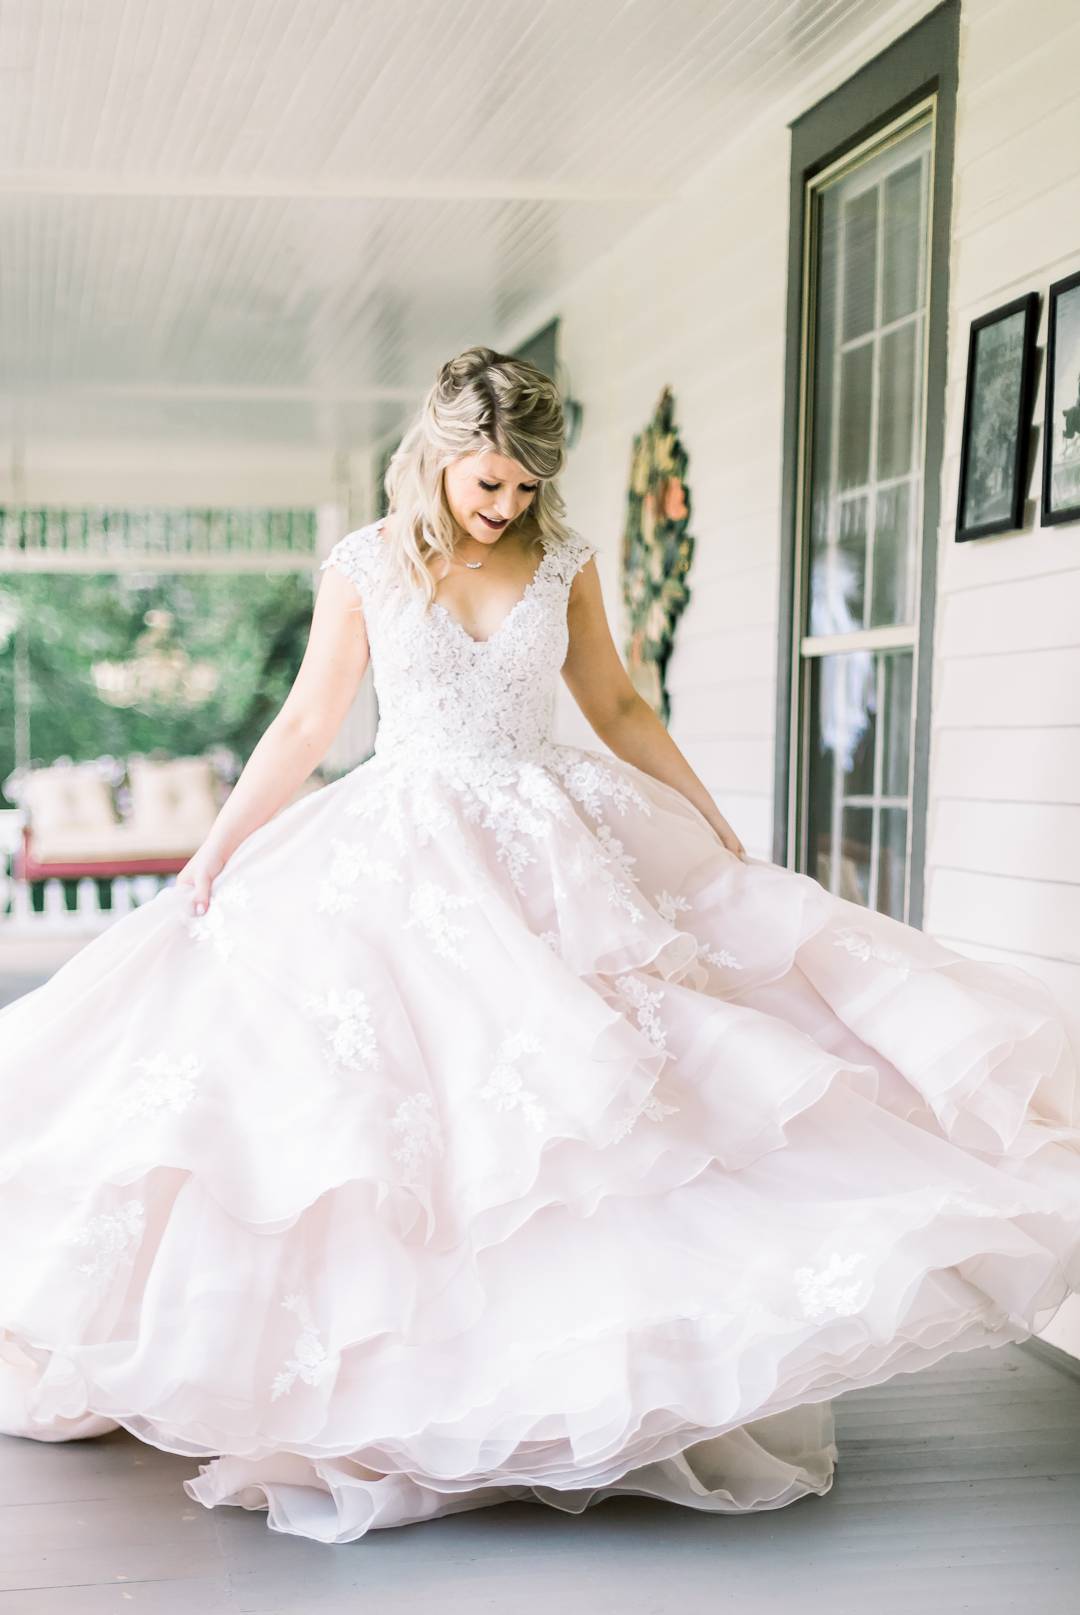 Bride in Essense of Australia wedding gown at her private residence wedding in Atlanta by Leigh Wolfe Photography.